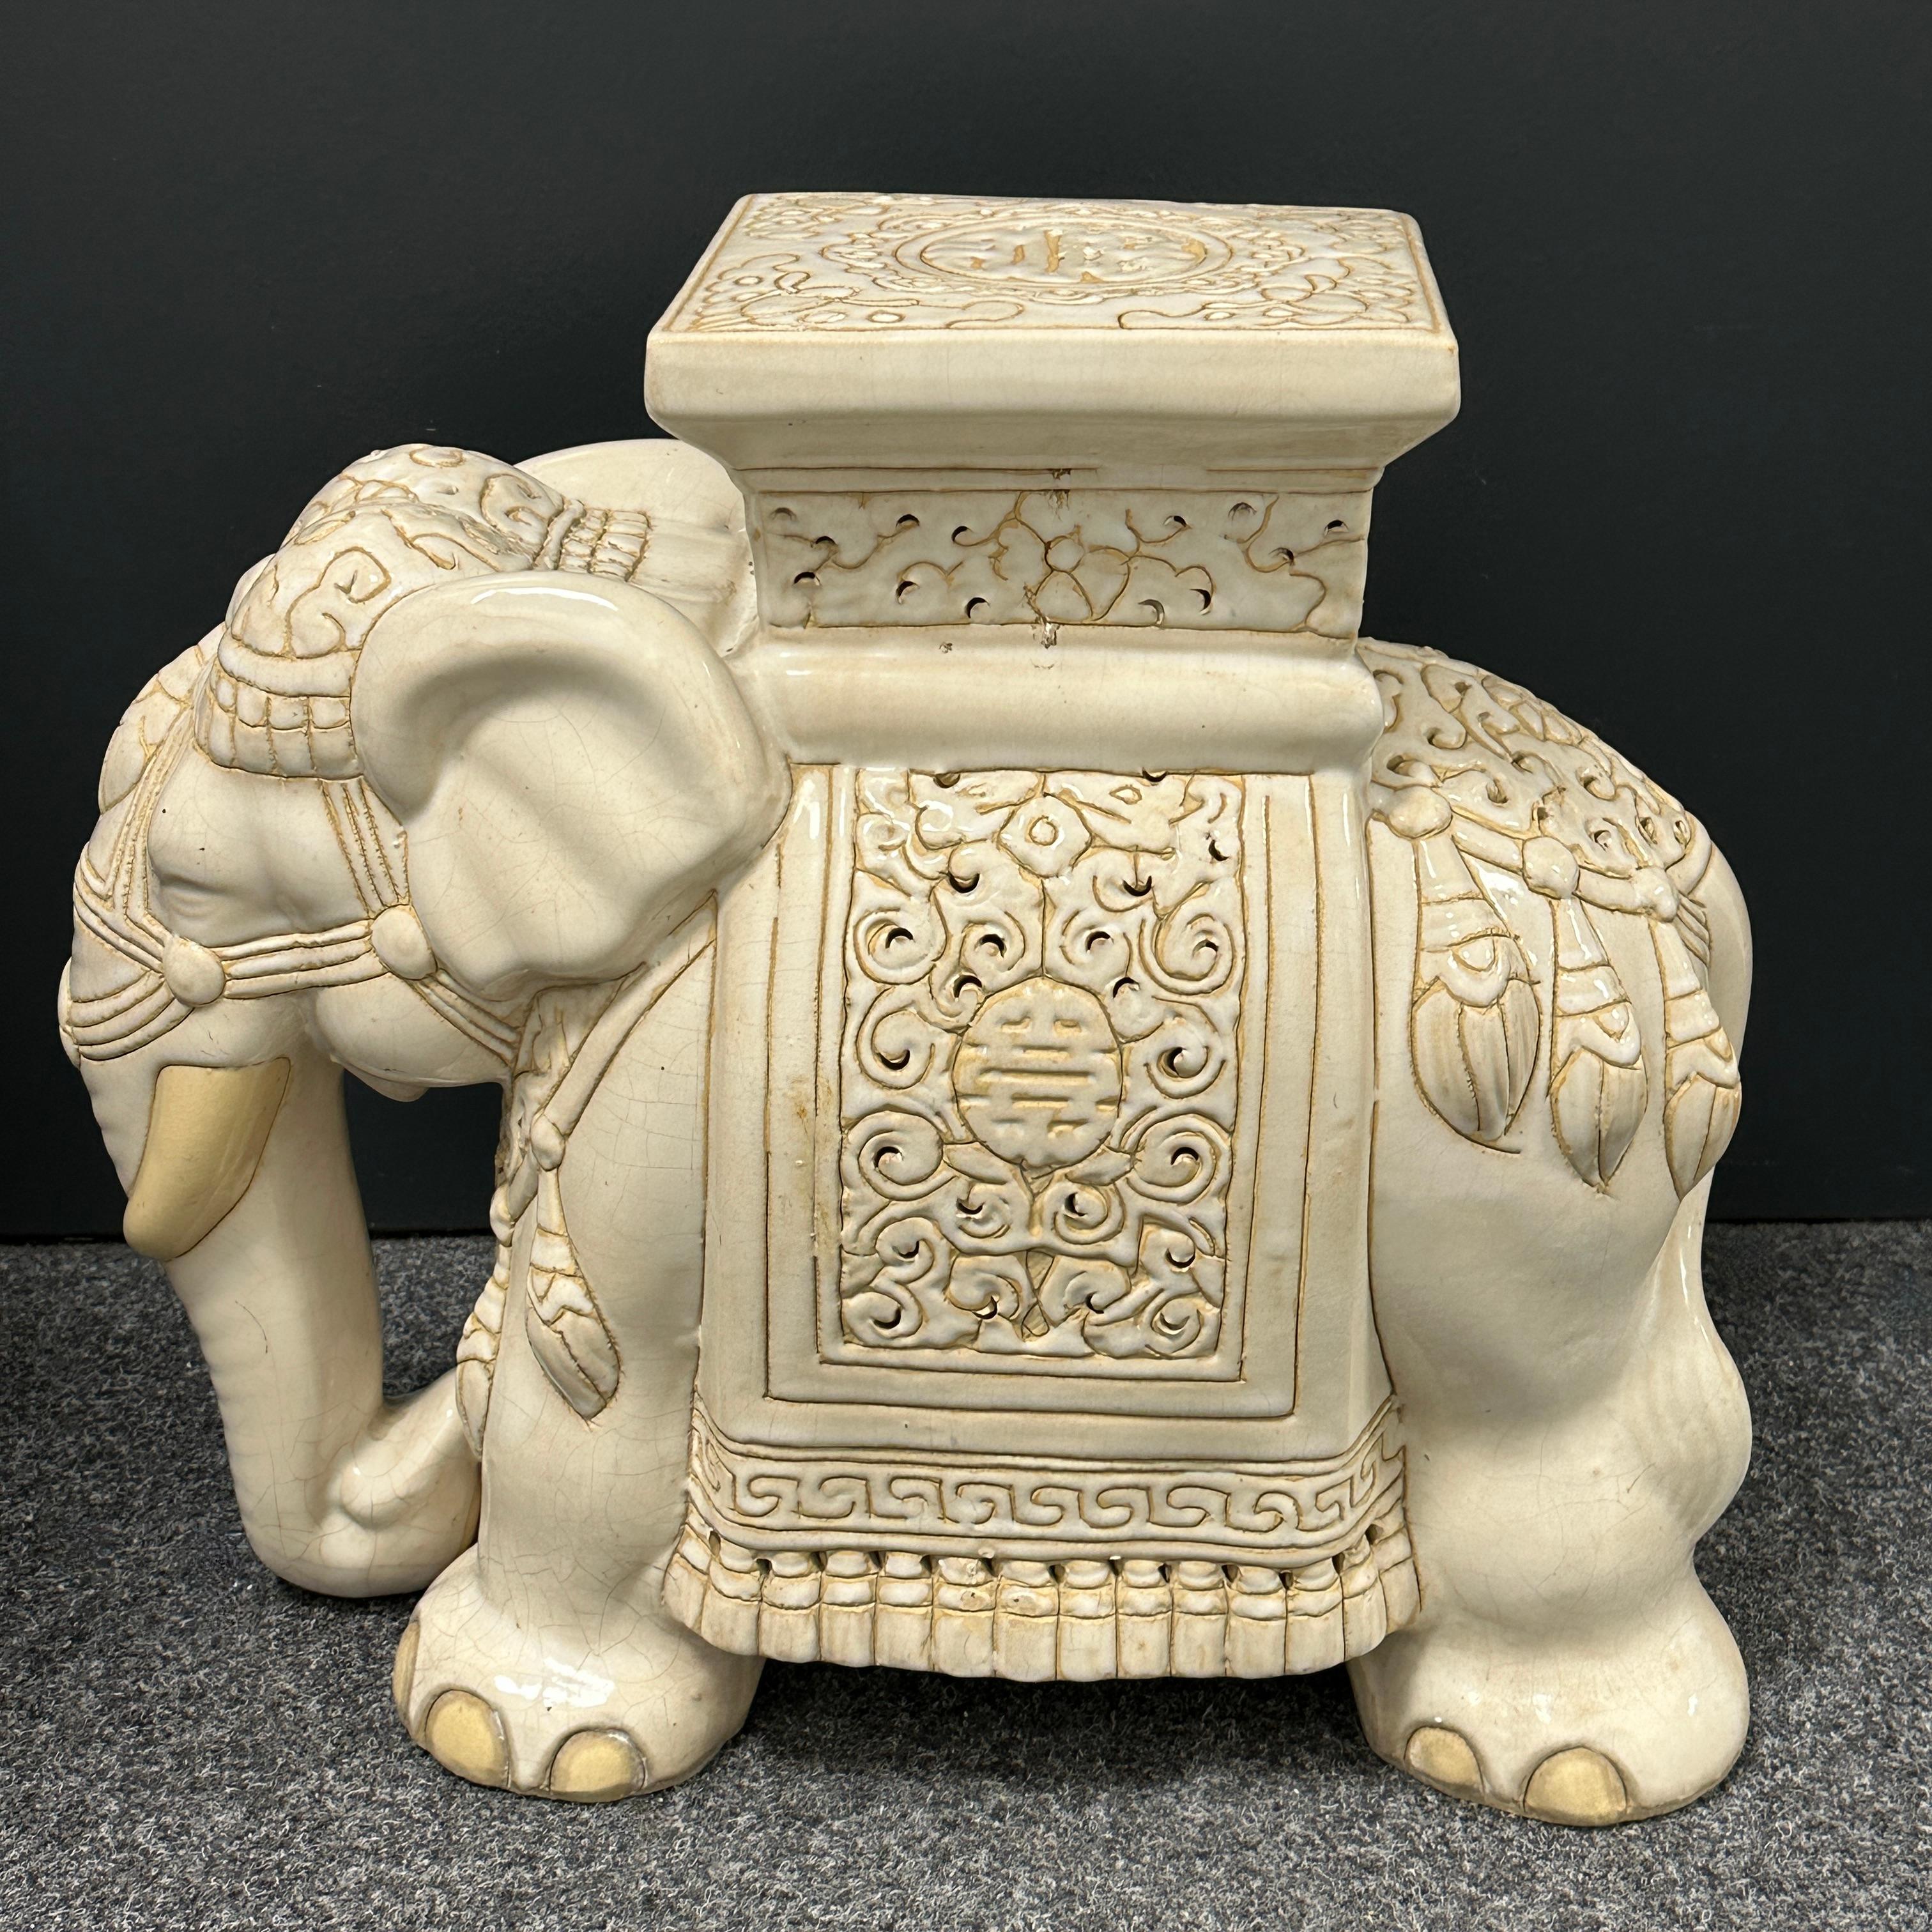 Mid-20th Century Hollywood Regency Chinese Ivory Colored Elephant Garden Plant Stand or Seat